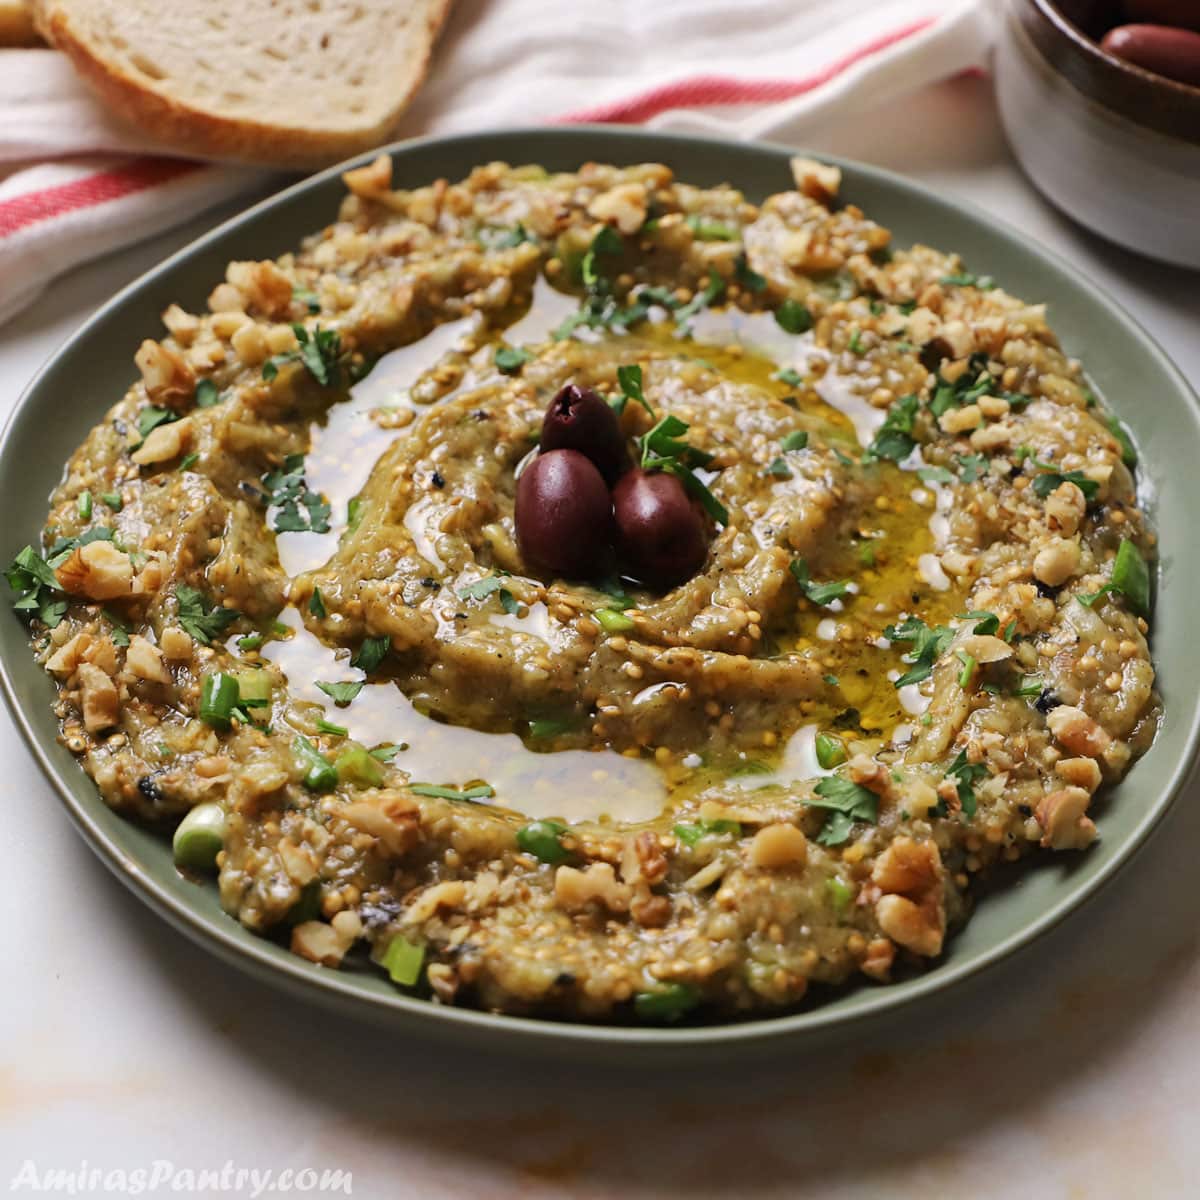 Greek eggplant dip placed in a green plate and garnished with parsley and olive oil.